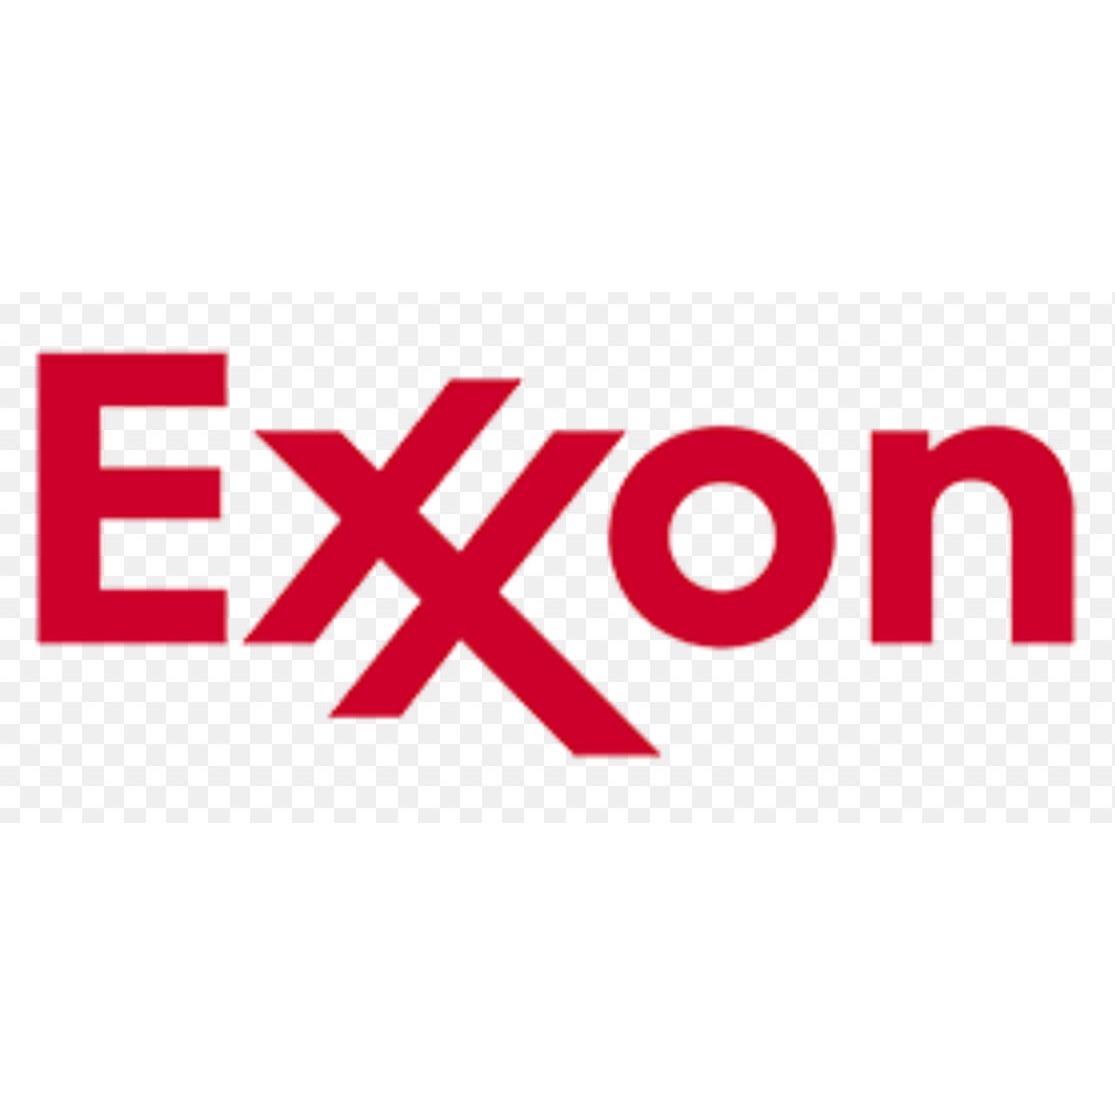 Exxon - Hagerstown, MD 21740 - (301)745-5131 | ShowMeLocal.com